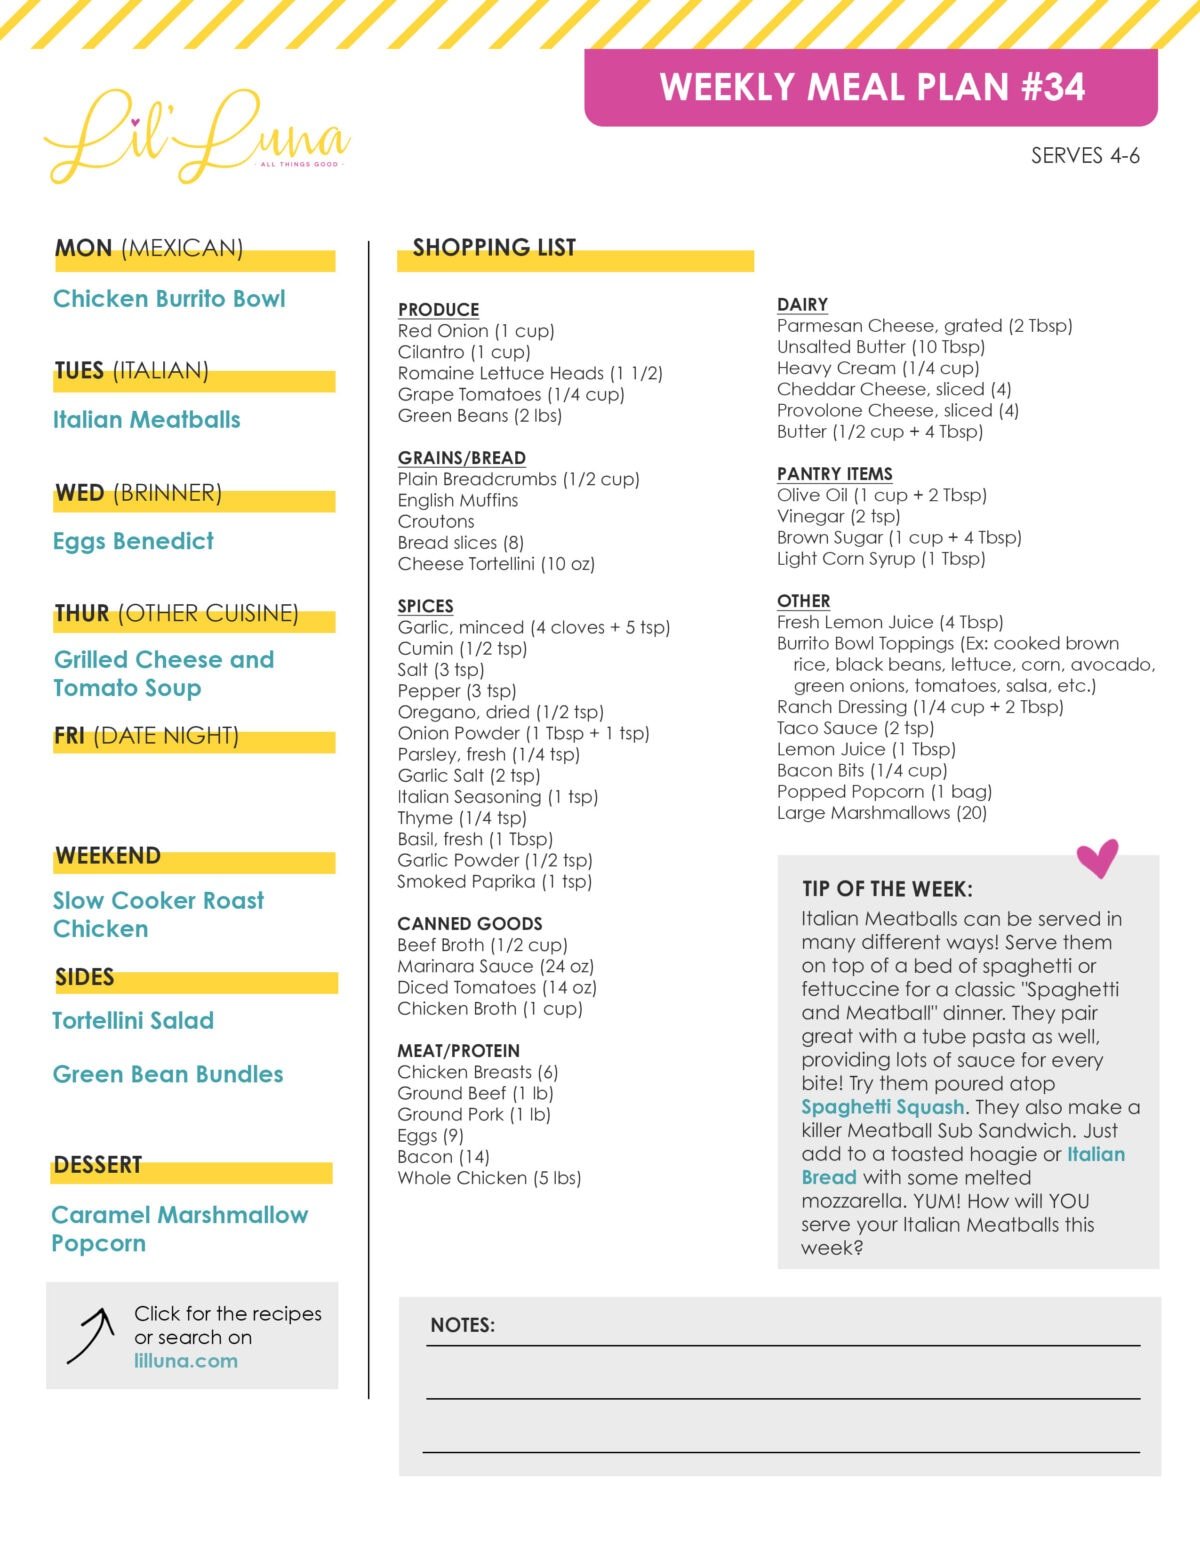 The printable grocery list for week #34 free meal plan